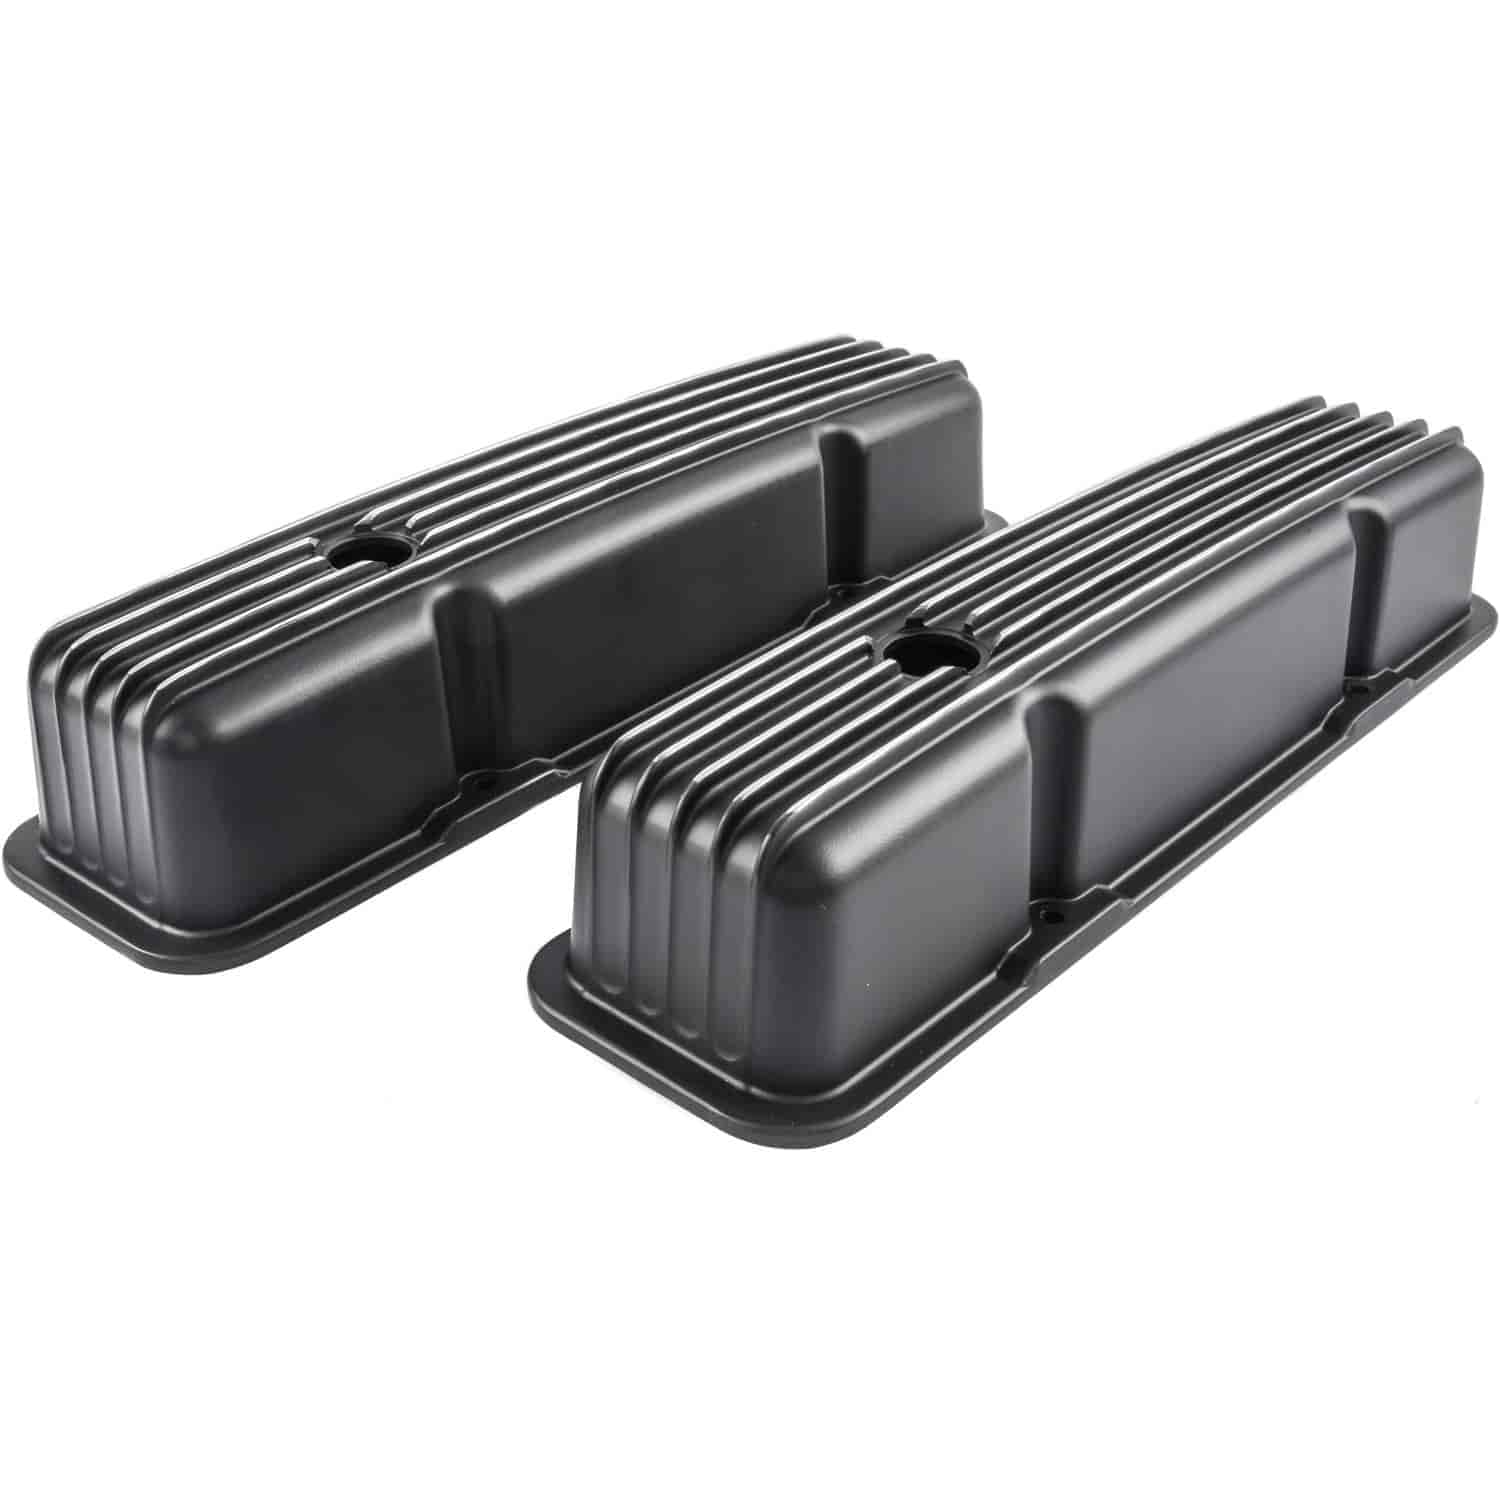 Black Finned Valve Covers for 1958-1986 Small Block Chevy